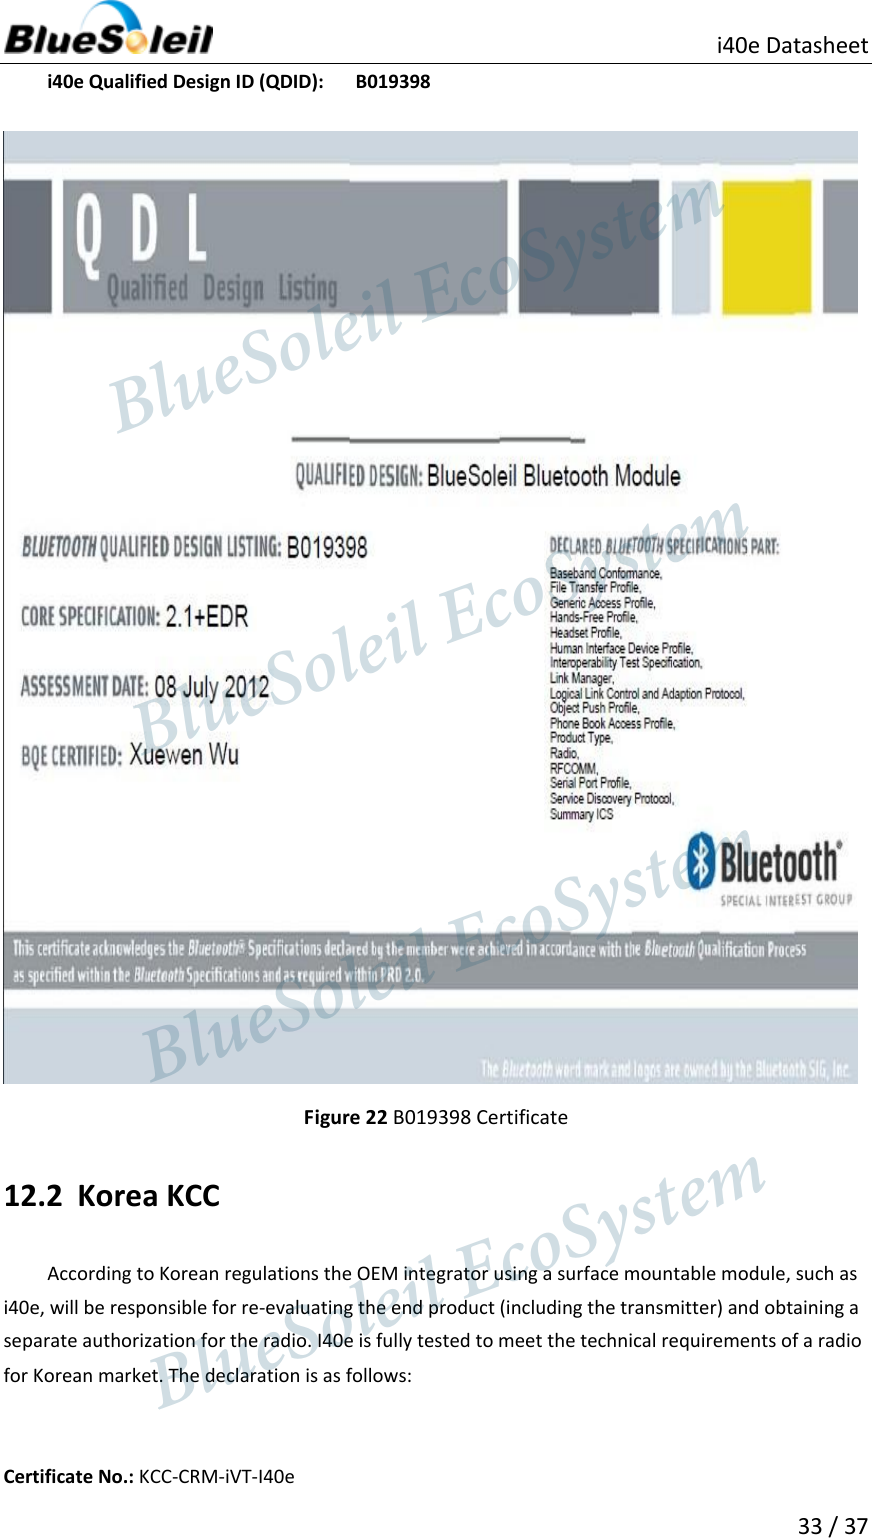                          i40e Datasheet  33 / 37  i40e Qualified Design ID (QDID):     B019398    Figure 22 B019398 Certificate 12.2 Korea KCC According to Korean regulations the OEM integrator using a surface mountable module, such as i40e, will be responsible for re-evaluating the end product (including the transmitter) and obtaining a separate authorization for the radio. I40e is fully tested to meet the technical requirements of a radio for Korean market. The declaration is as follows:  Certificate No.: KCC-CRM-iVT-I40e                  BlueSoleil EcoSystem            BlueSoleil EcoSystem      BlueSoleil EcoSystemBlueSoleil EcoSystem